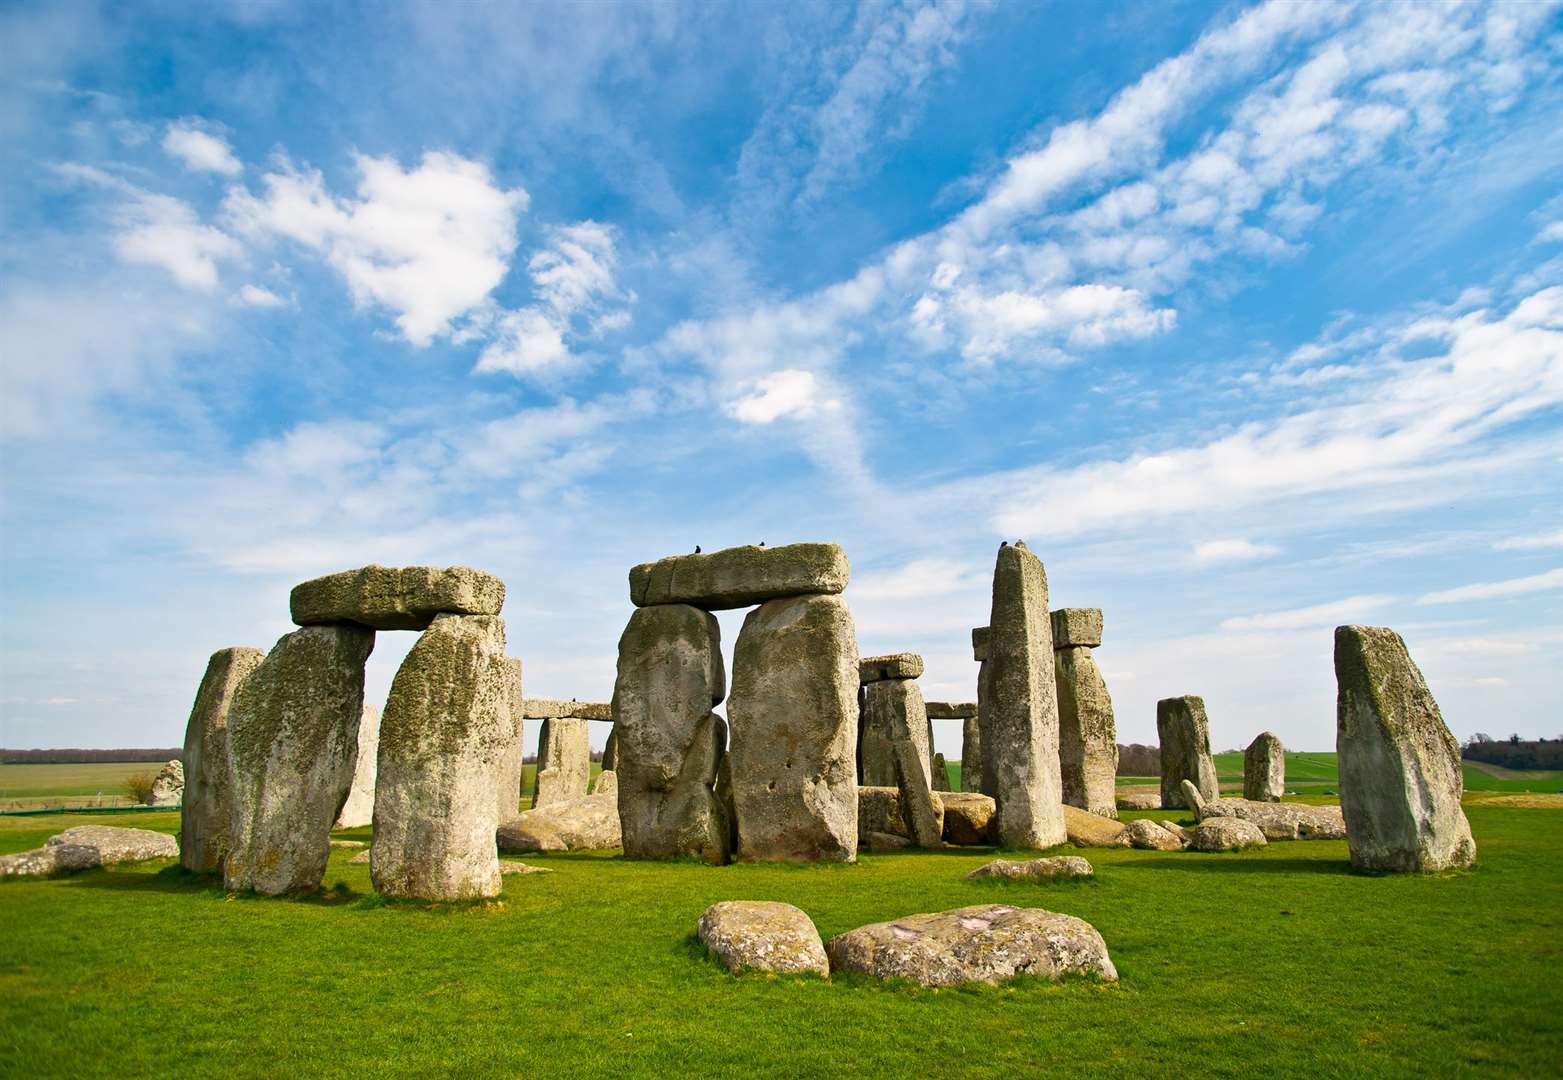 If even Stonehenge is at risk, where else could be in danger of losing its World Heritage title?